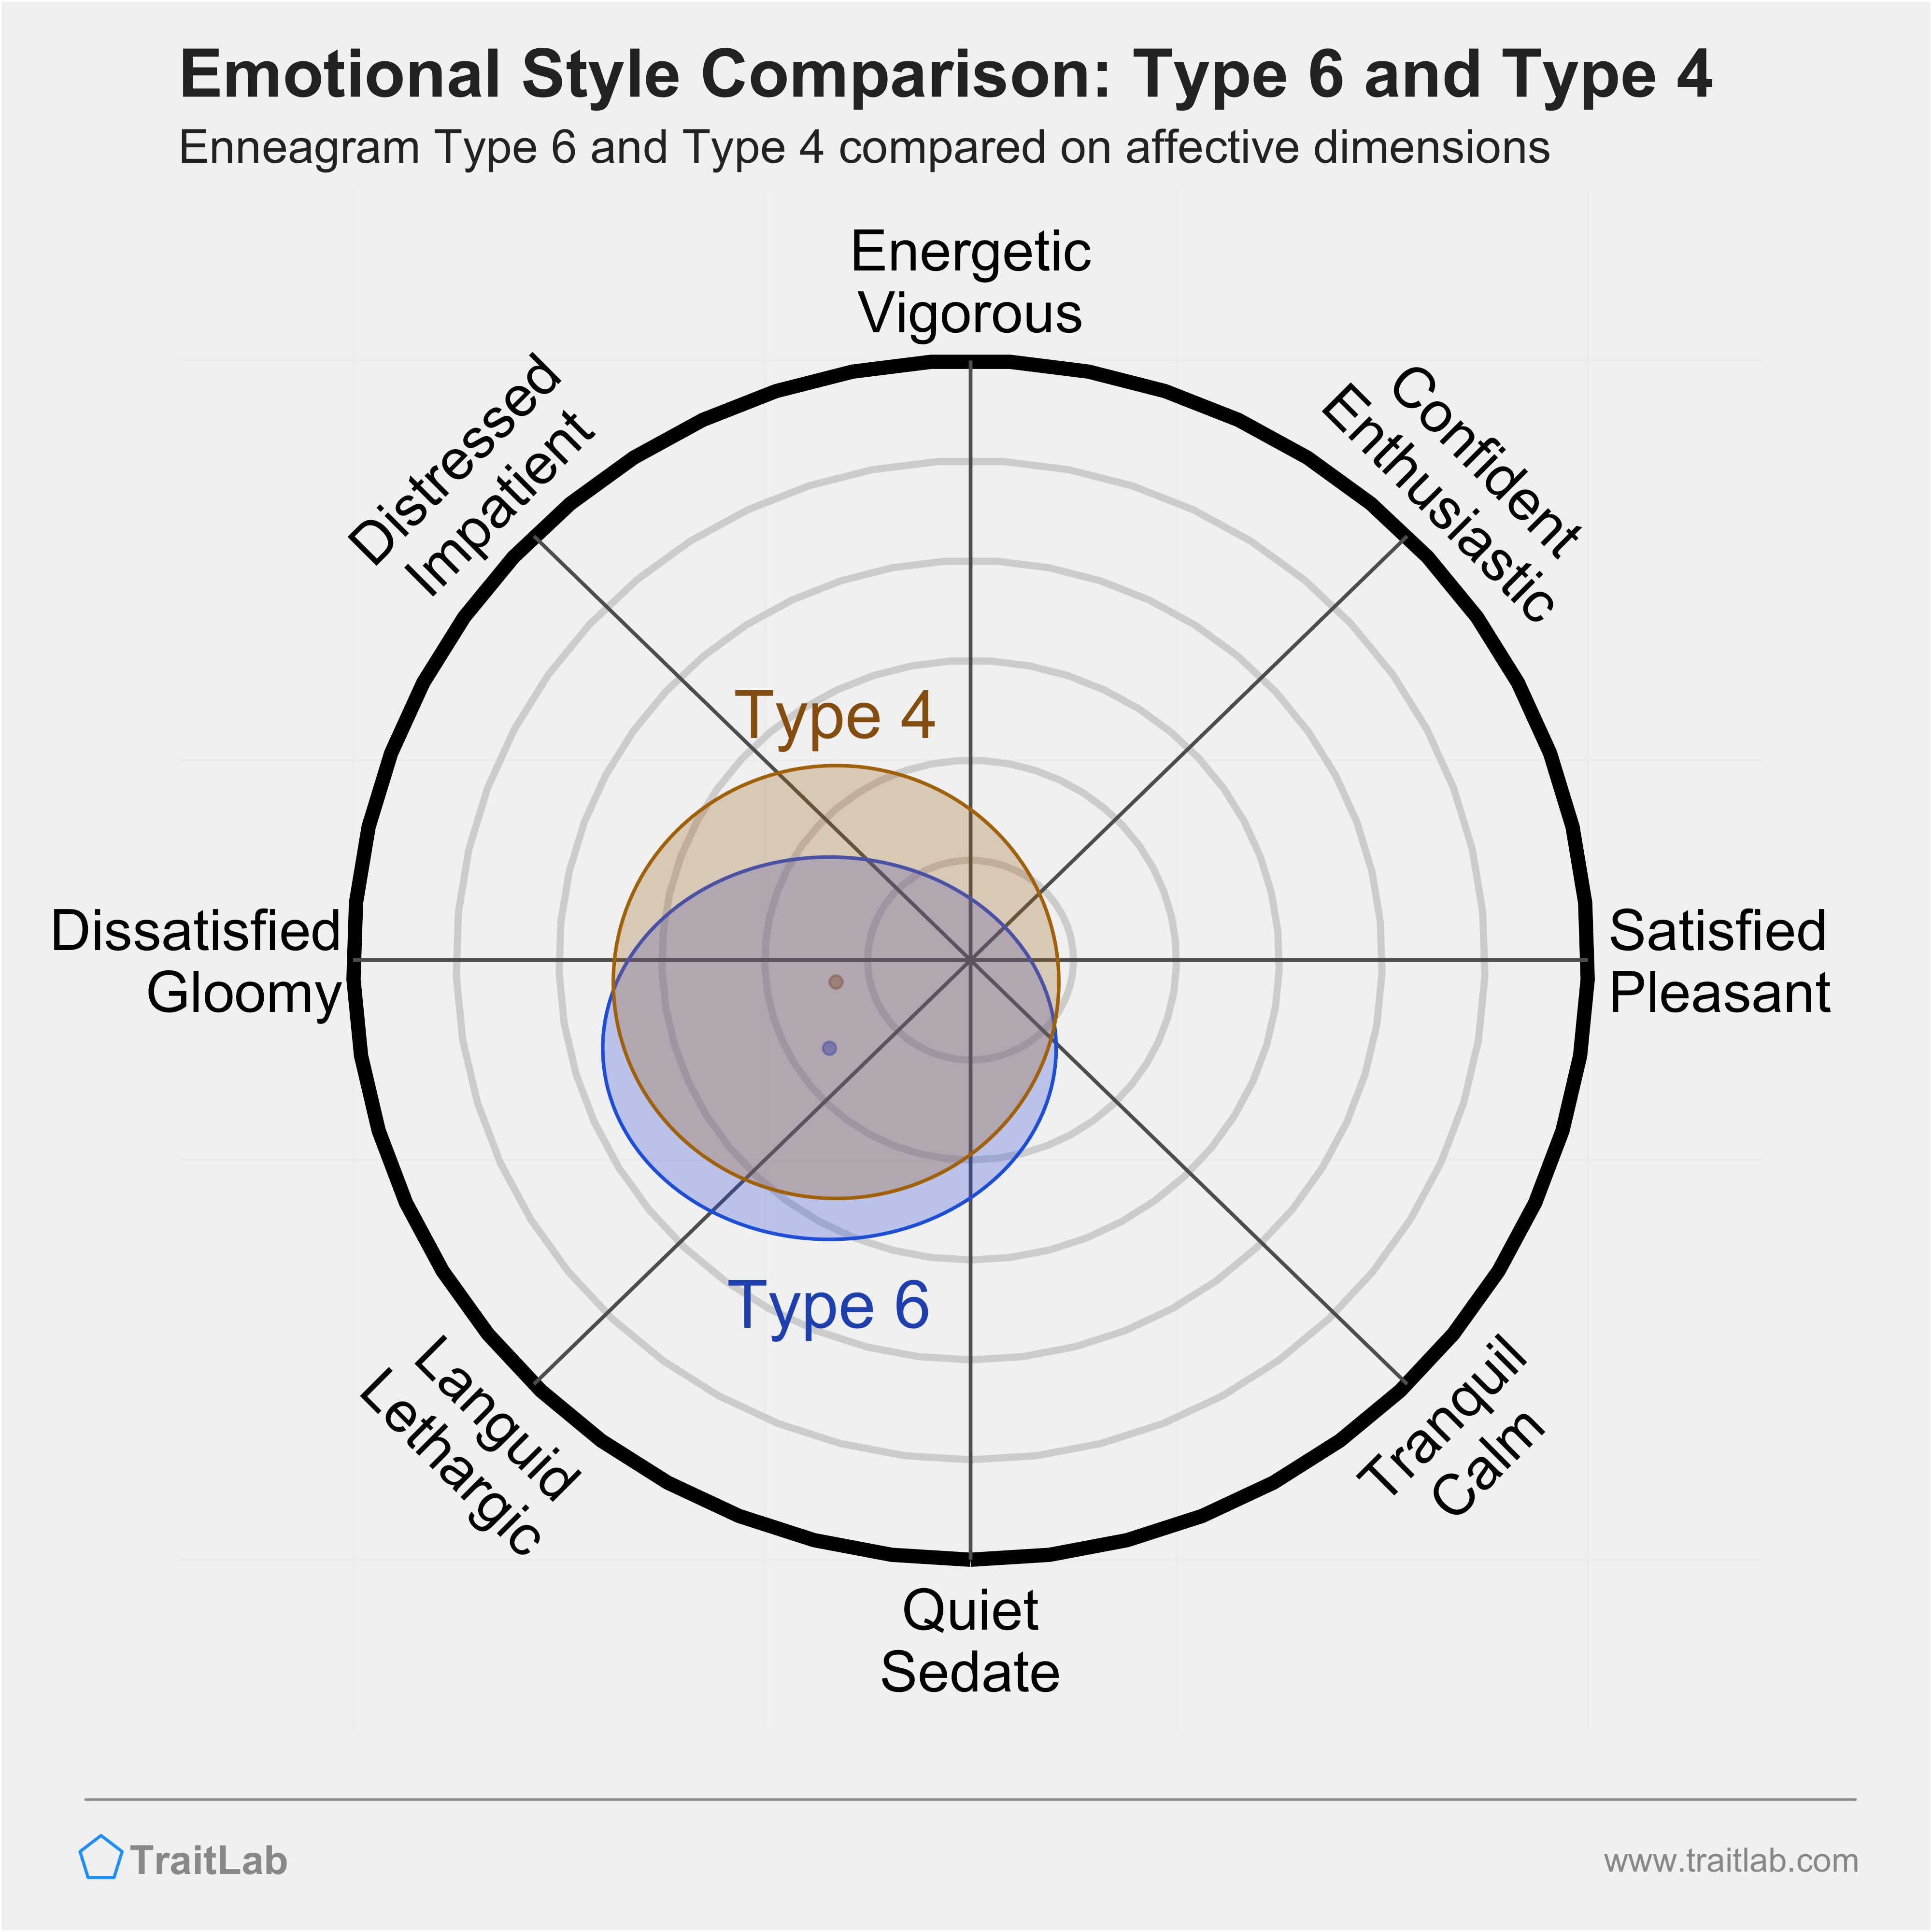 Type 6 and Type 4 comparison across emotional (affective) dimensions